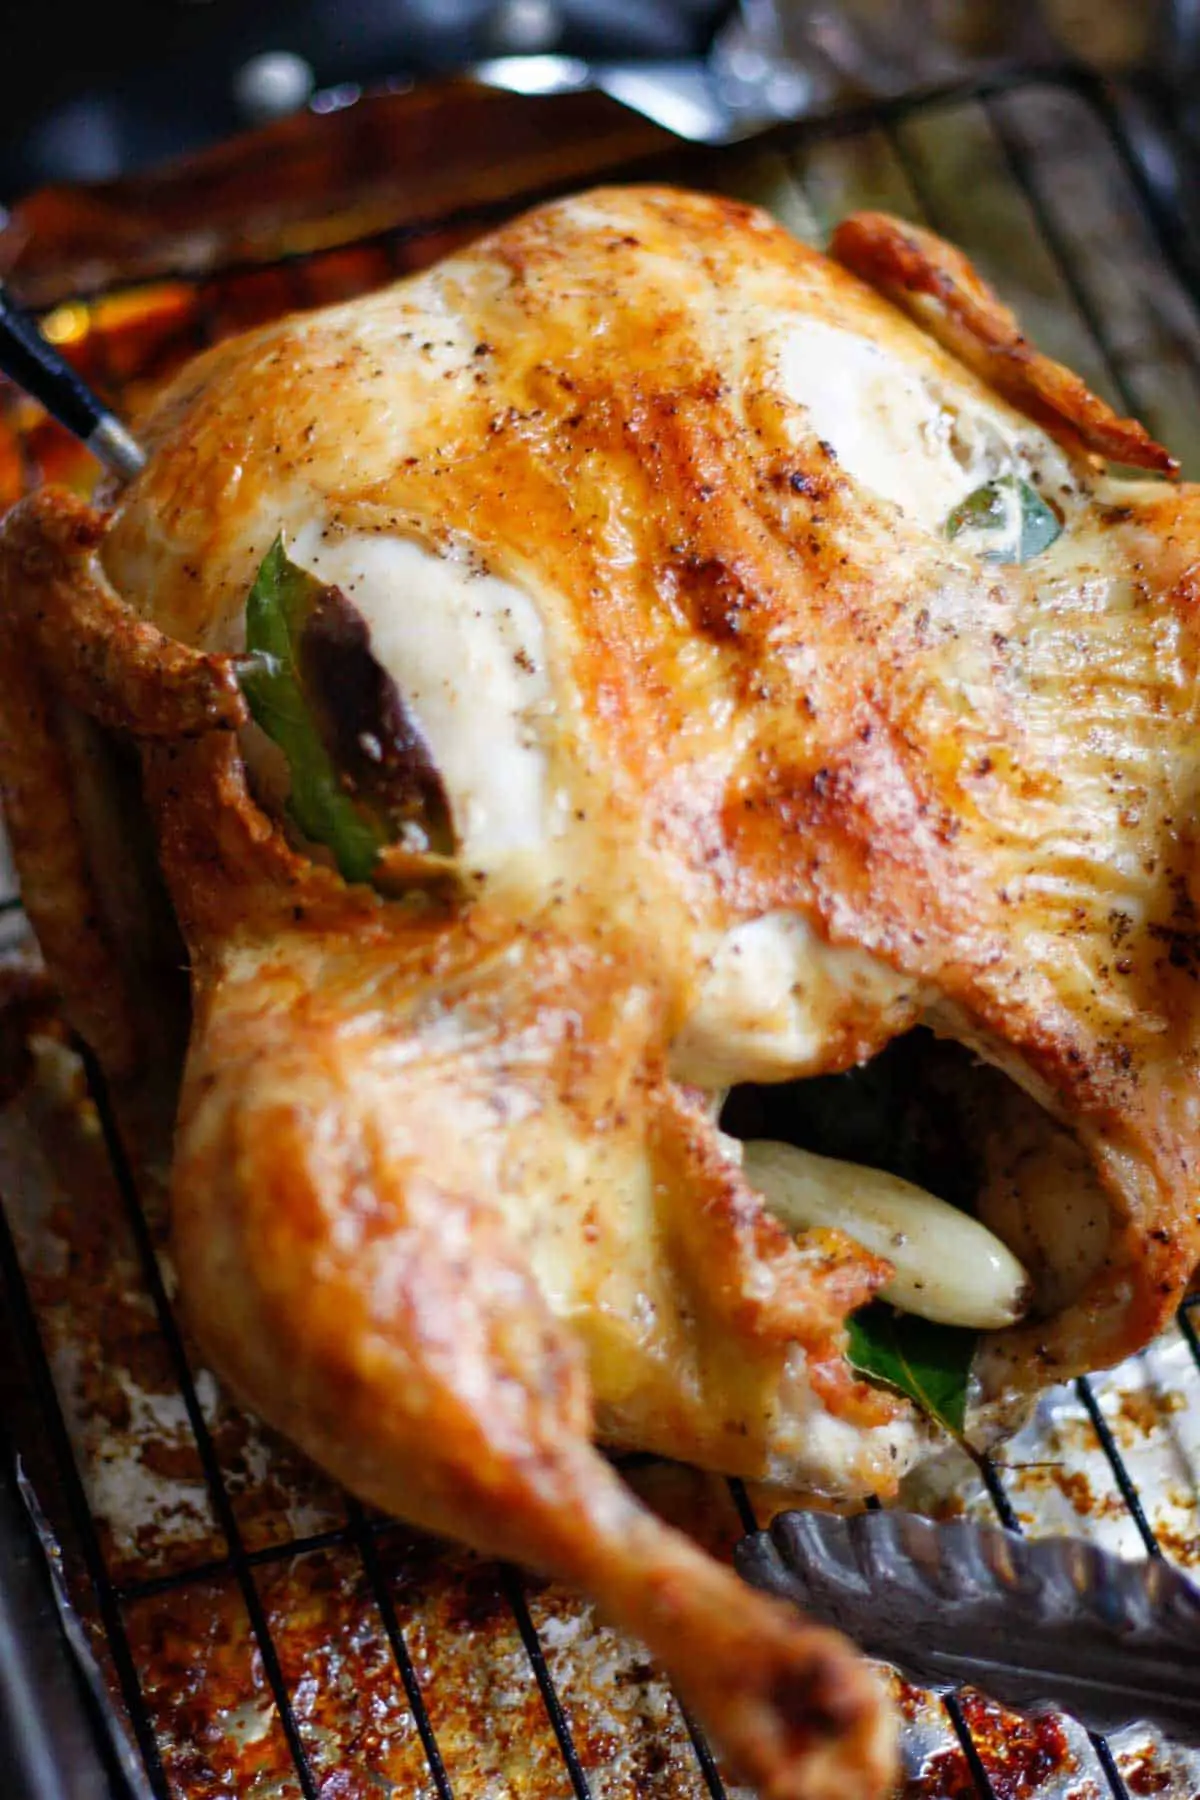 A roast chicken with crispy skin with holes in the skin that have been stuffed with bay leaves and garlic. The chicken is on a wire rack in a roasting tray and there is also garlic and a bay leaf in the cavity of the chicken.